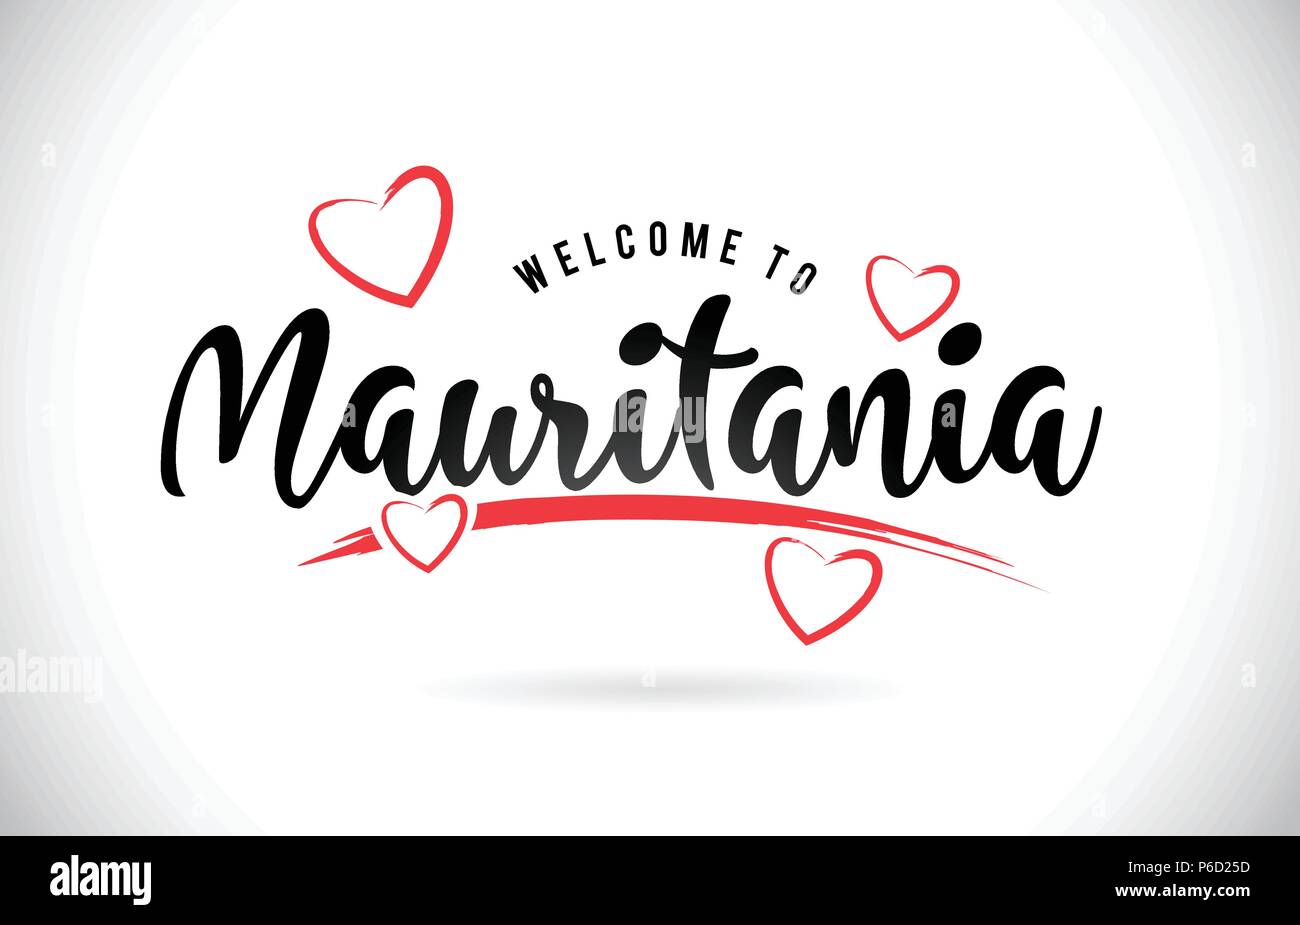 Mauritania Welcome To Word Text with Handwritten Font and Red Love Hearts Vector Image Illustration Eps. Stock Vector